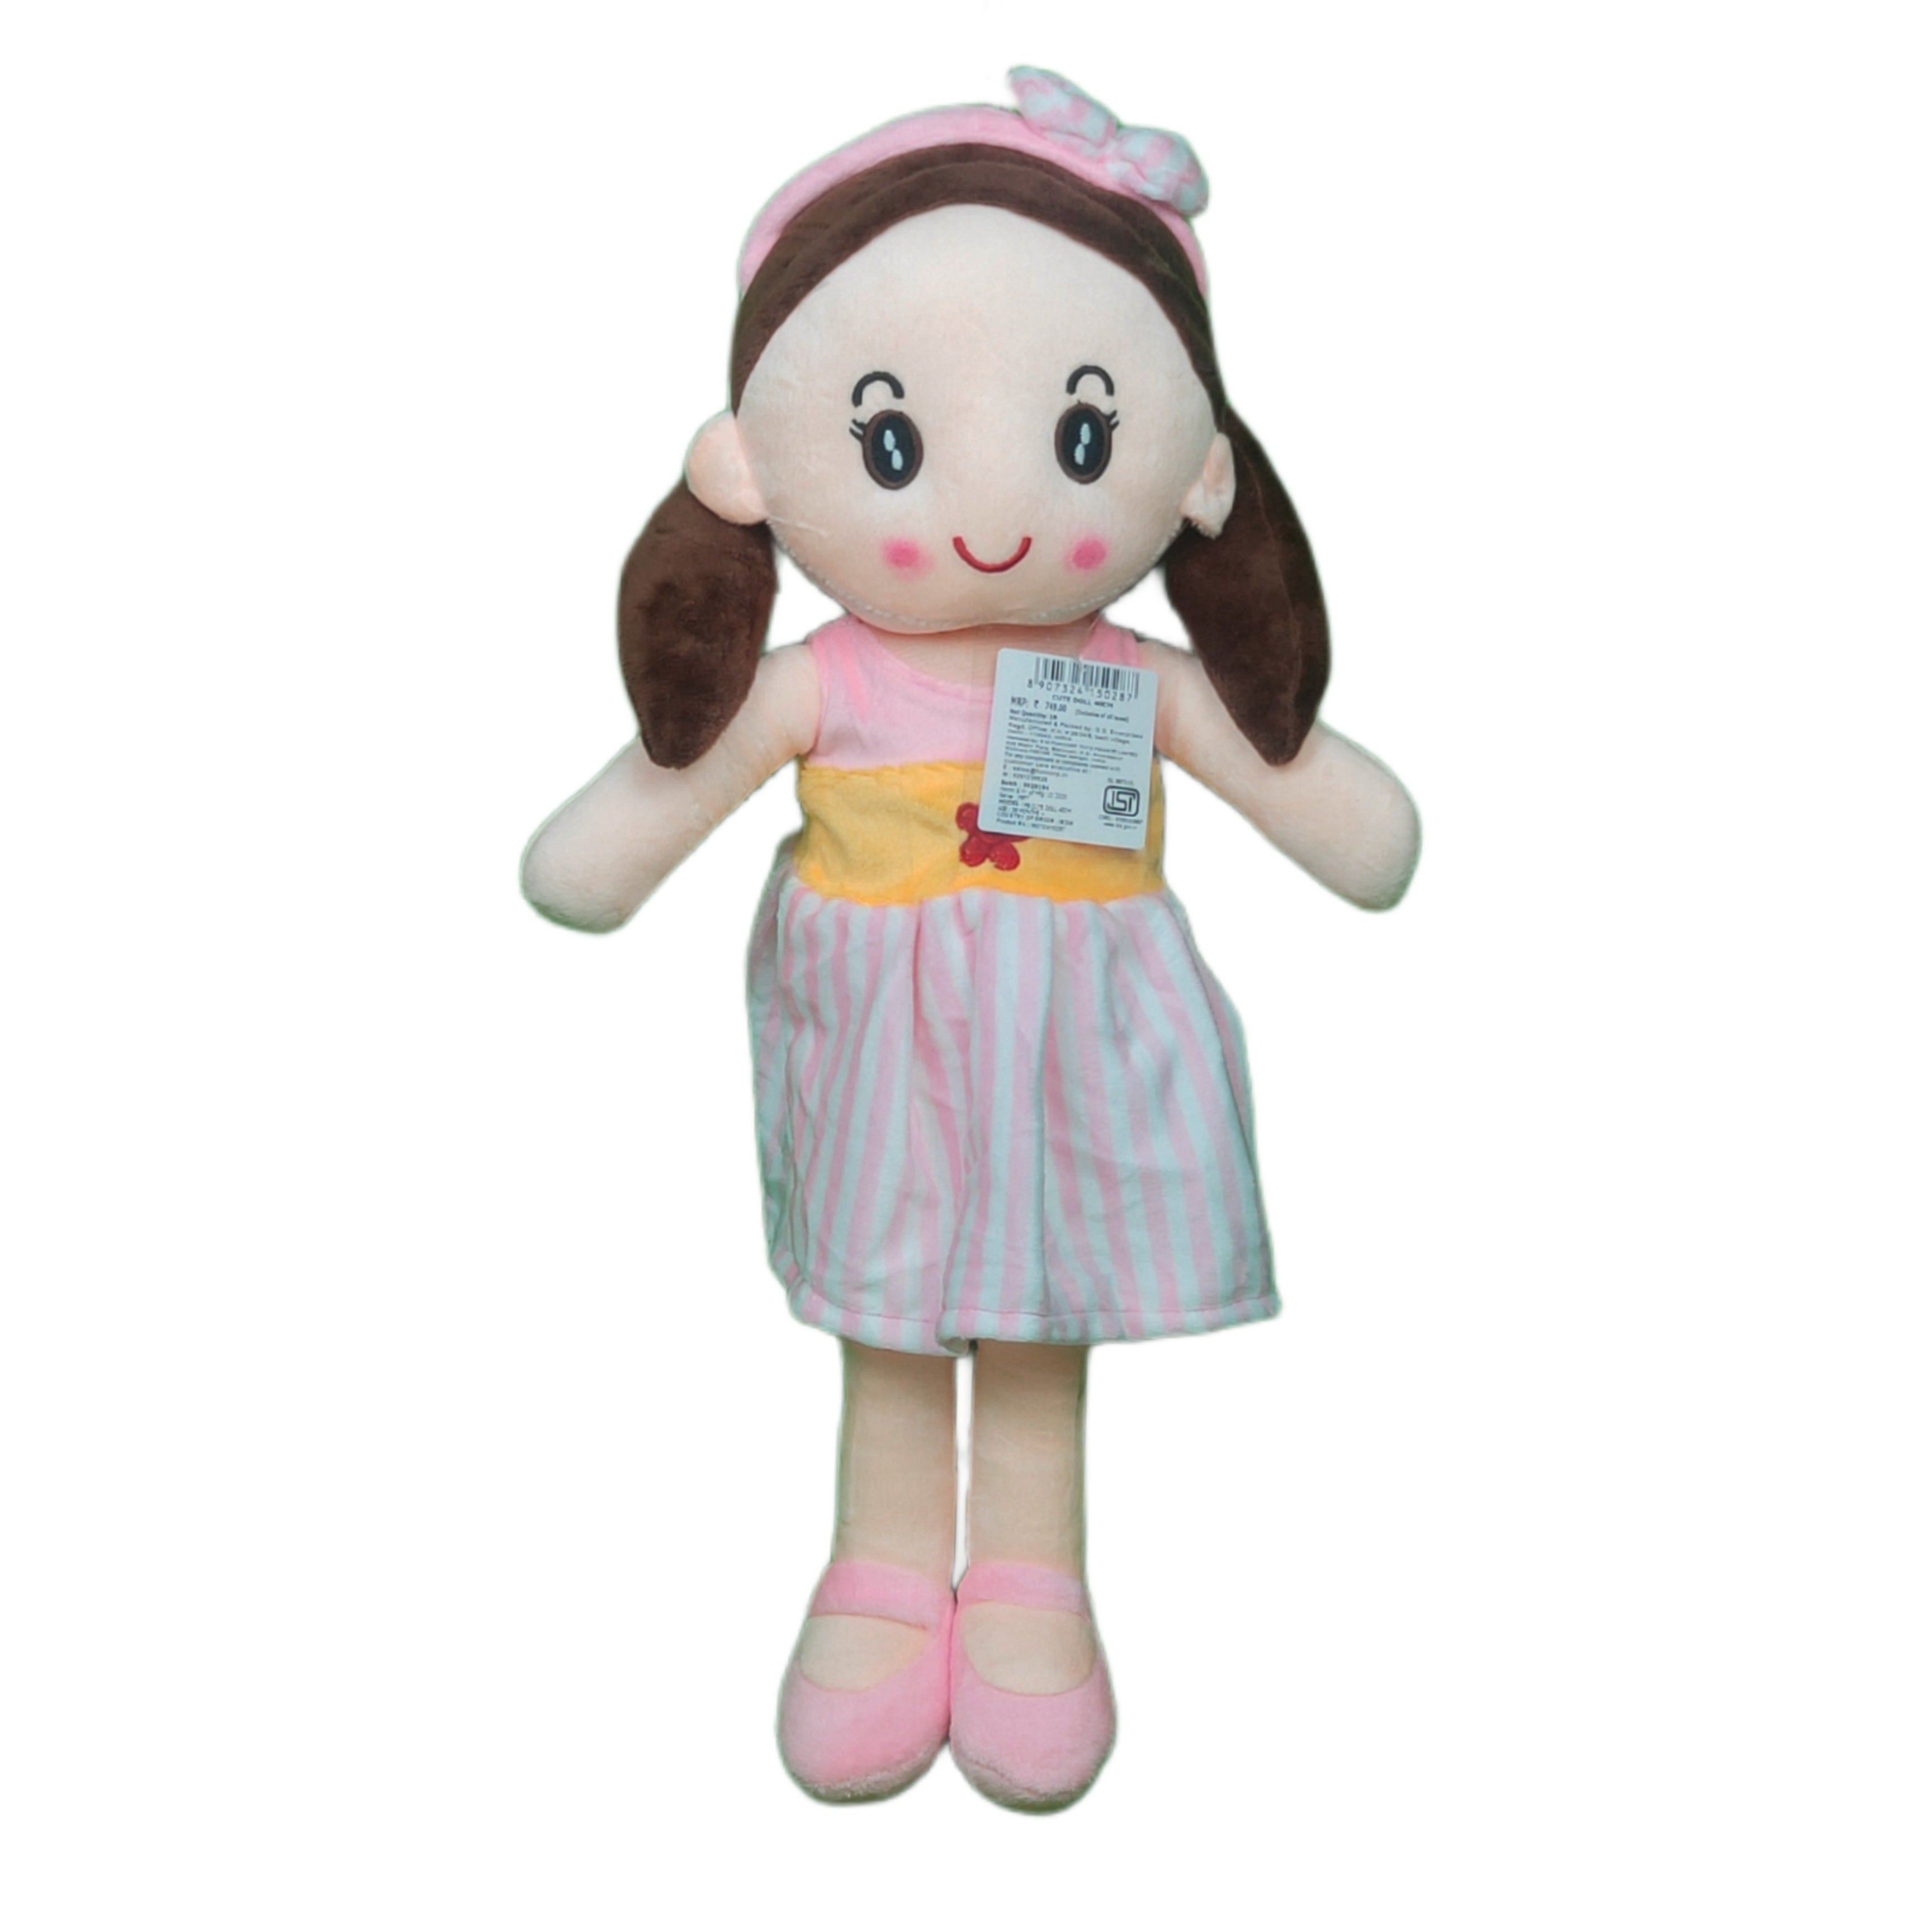 Play Hour Cute Rag Doll Plush Soft Toy Wearing Baby Pink & White Stripes Frock for Ages 3 Years and Up, 40cm